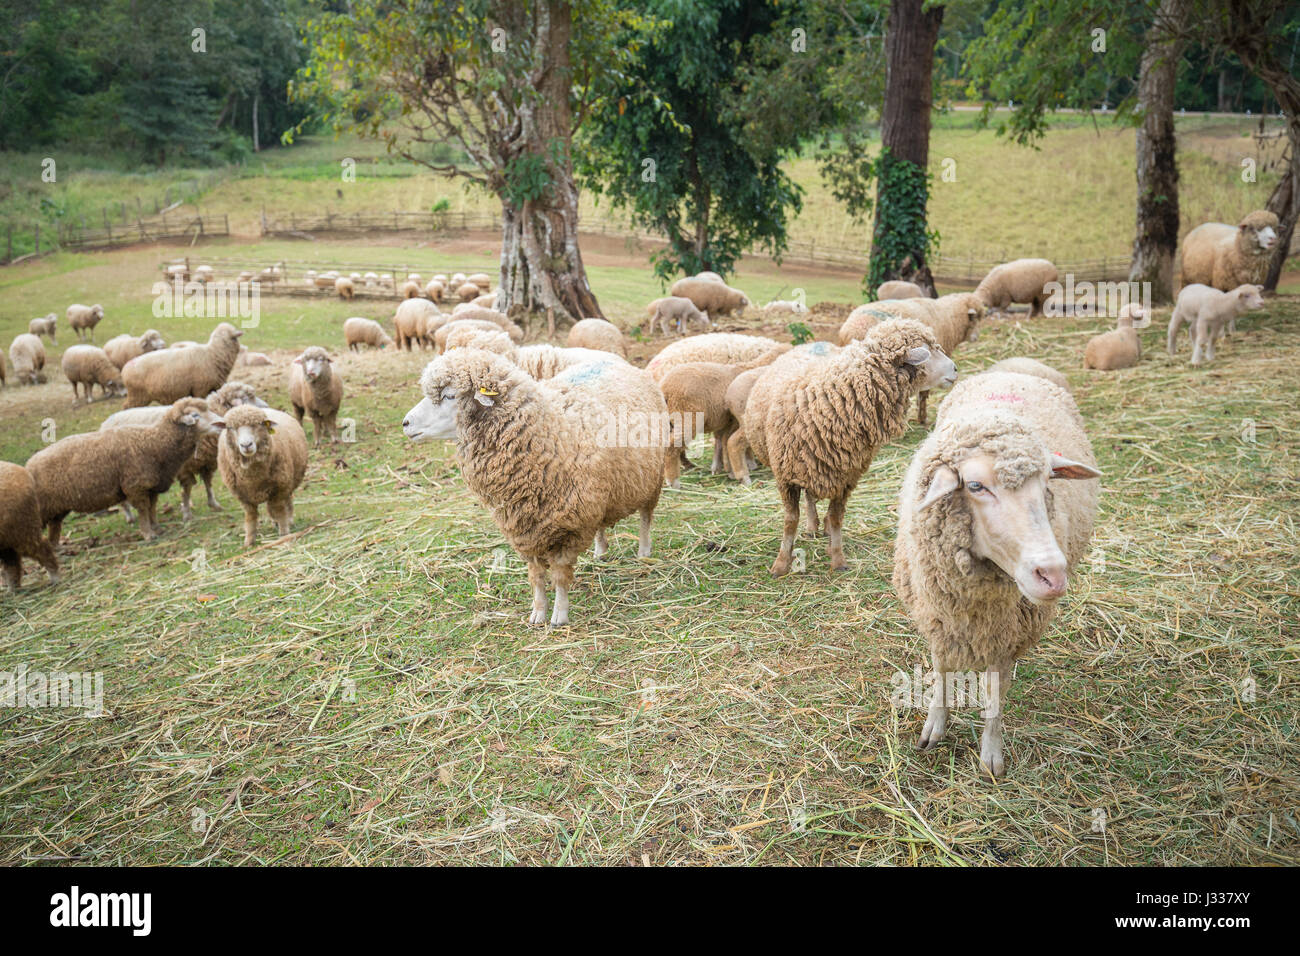 Group of brown fur sheep inside sloping hill farm covered by grass. Stock Photo